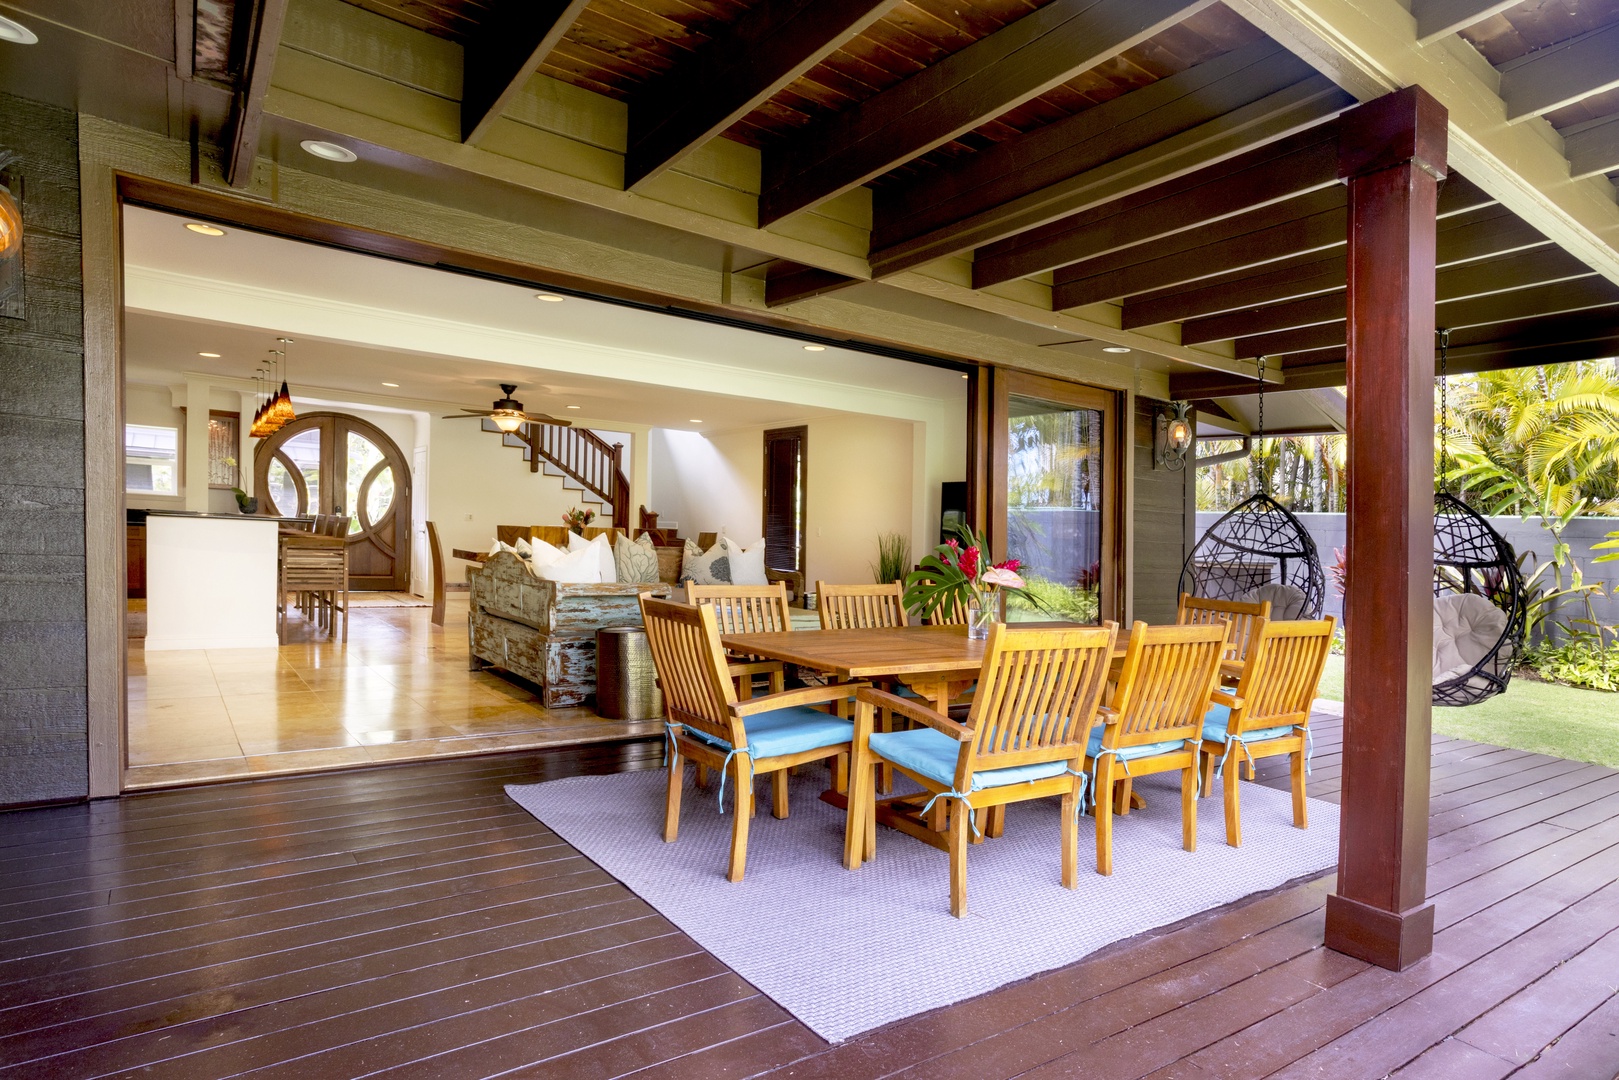 Kailua Vacation Rentals, Mokulua Seaside - The spacious covered lanai has dining for eight and easy access to the kitchen.